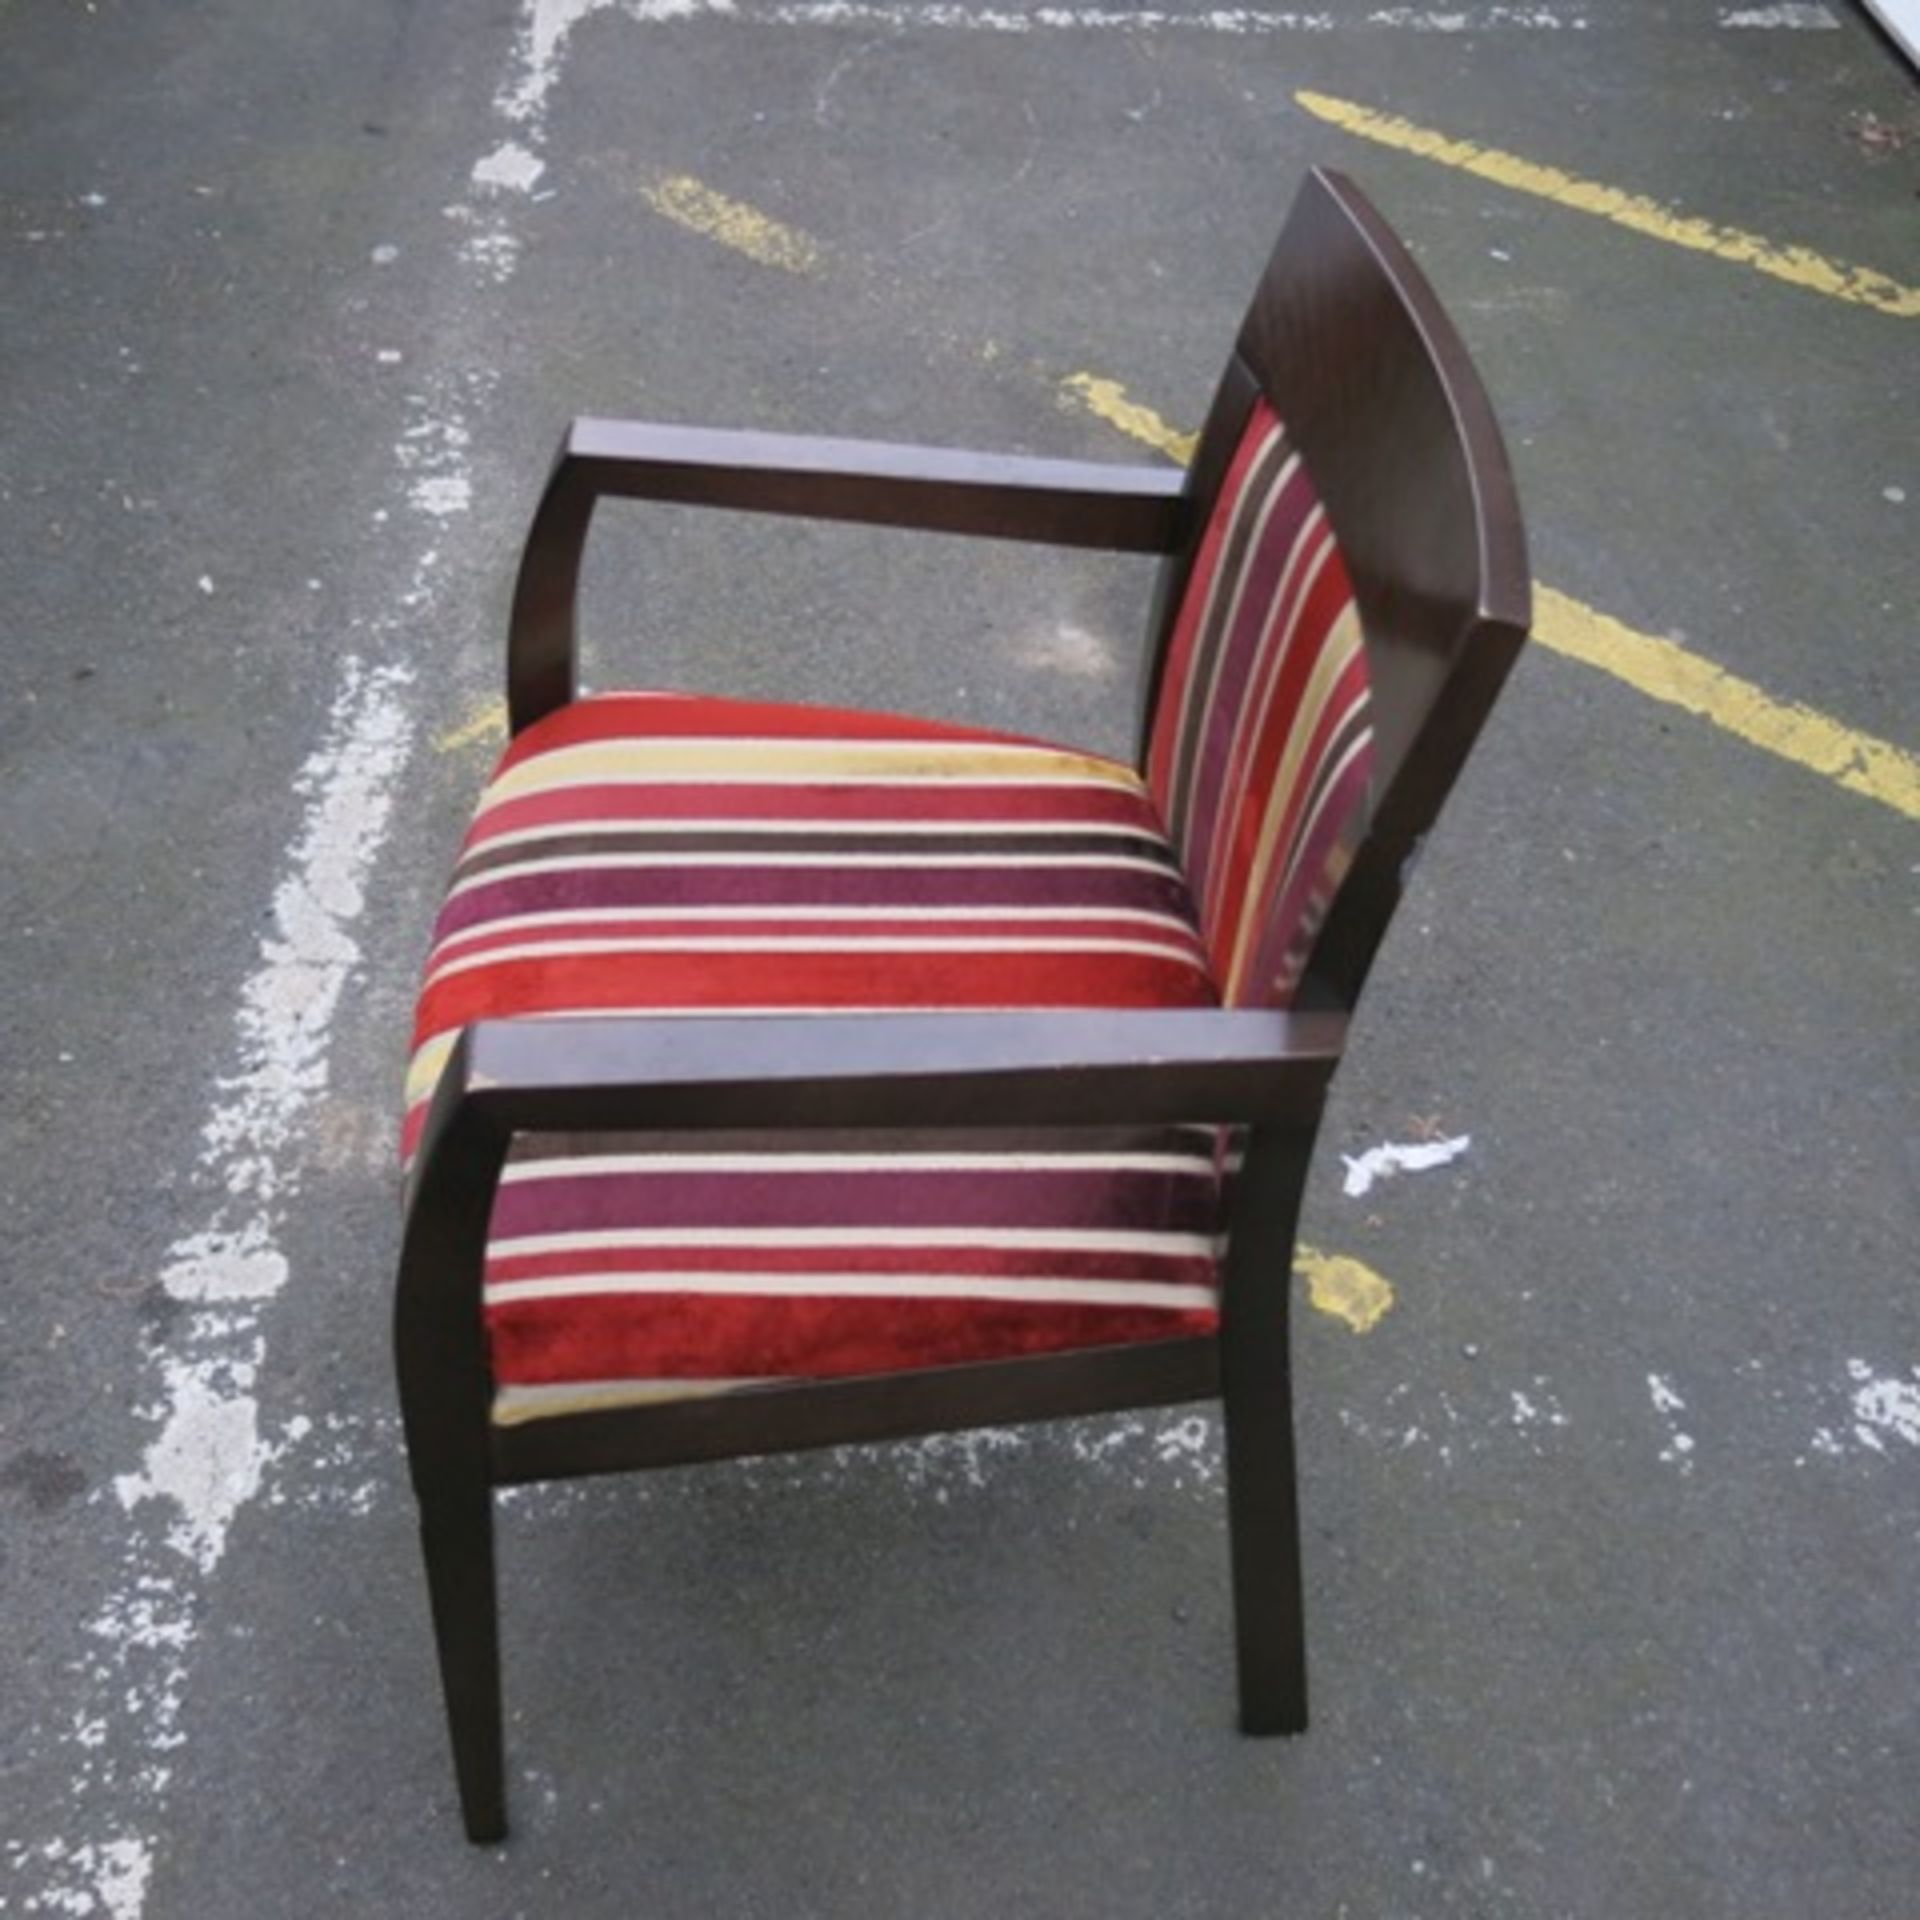 5 x Stained Darkwood Dining Chairs, Upholstered in Red/Gold/Brown Fabric - Image 5 of 5